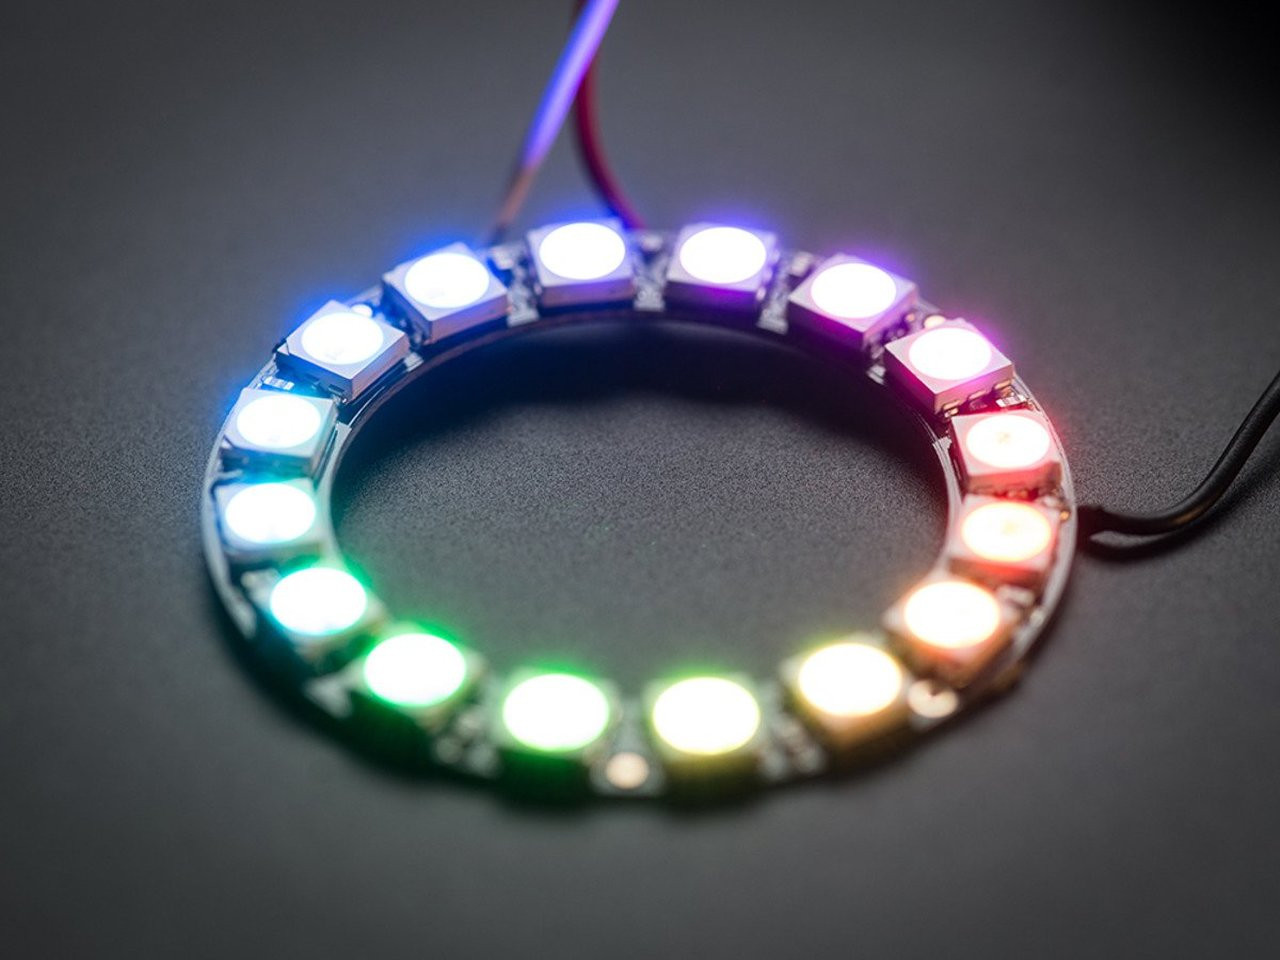 35 RGB LED Ring 35 X WS2812 5050 Full Color with Integrated Drivers 35 Bits  for Arduino Raspberry Pi ESP8266 Nodemcu DC5V